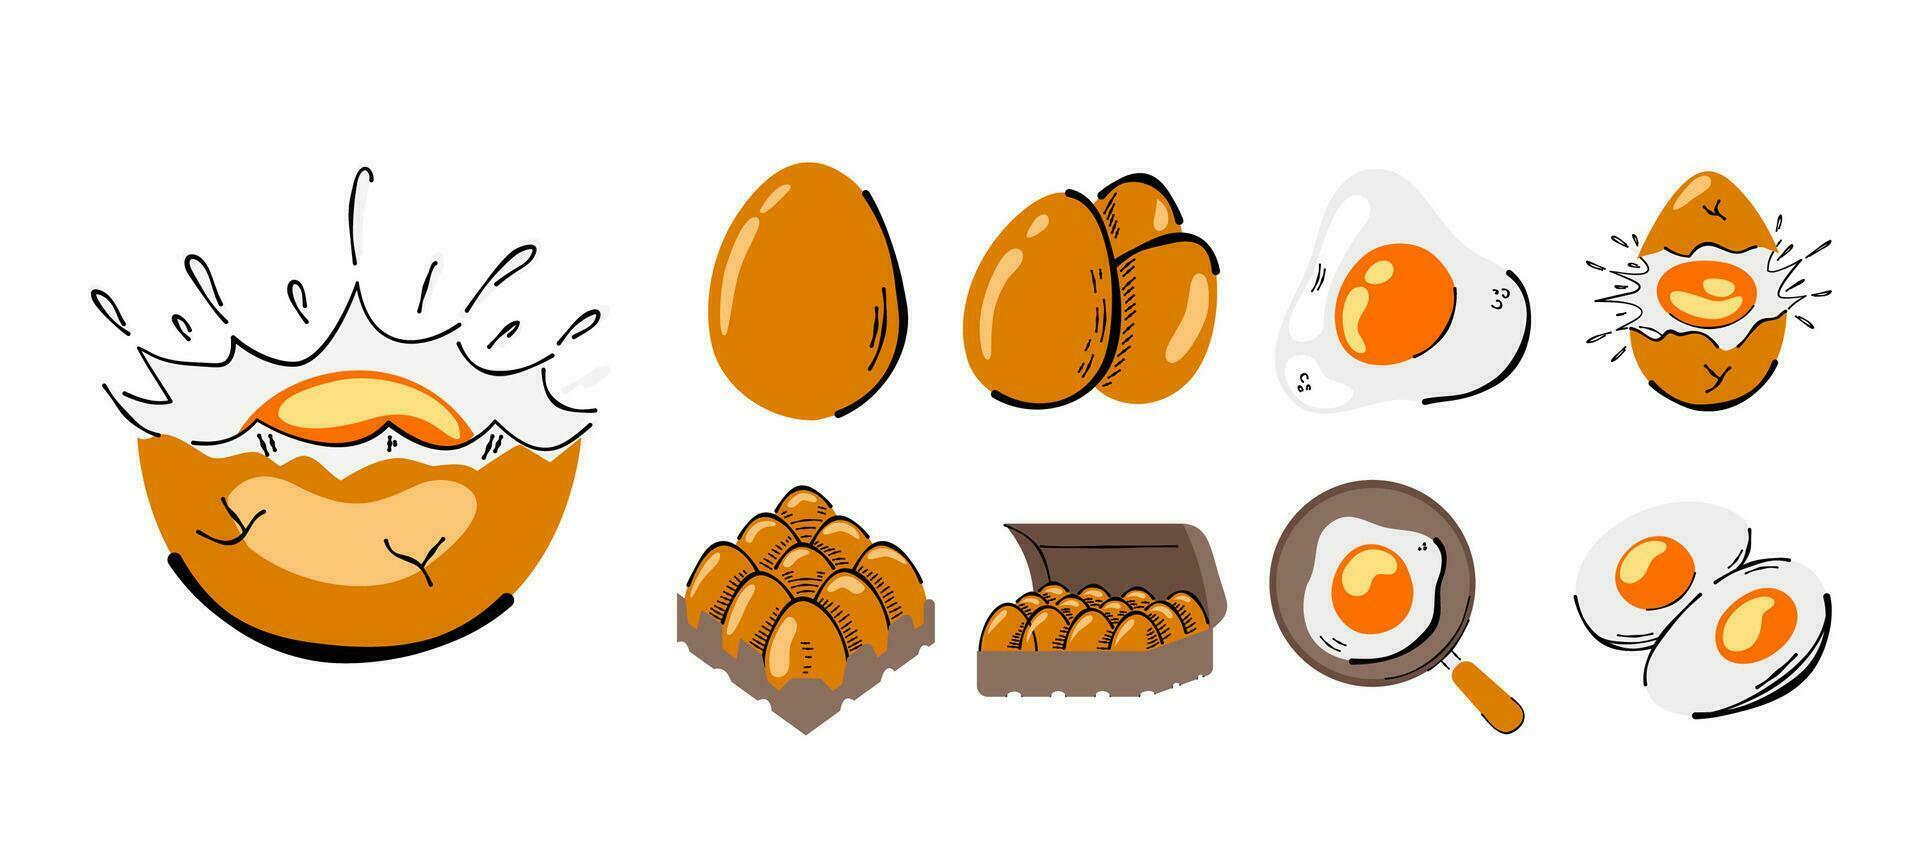 Egg Sketch Collection Cartoon Illustration for Education and Promotion vector